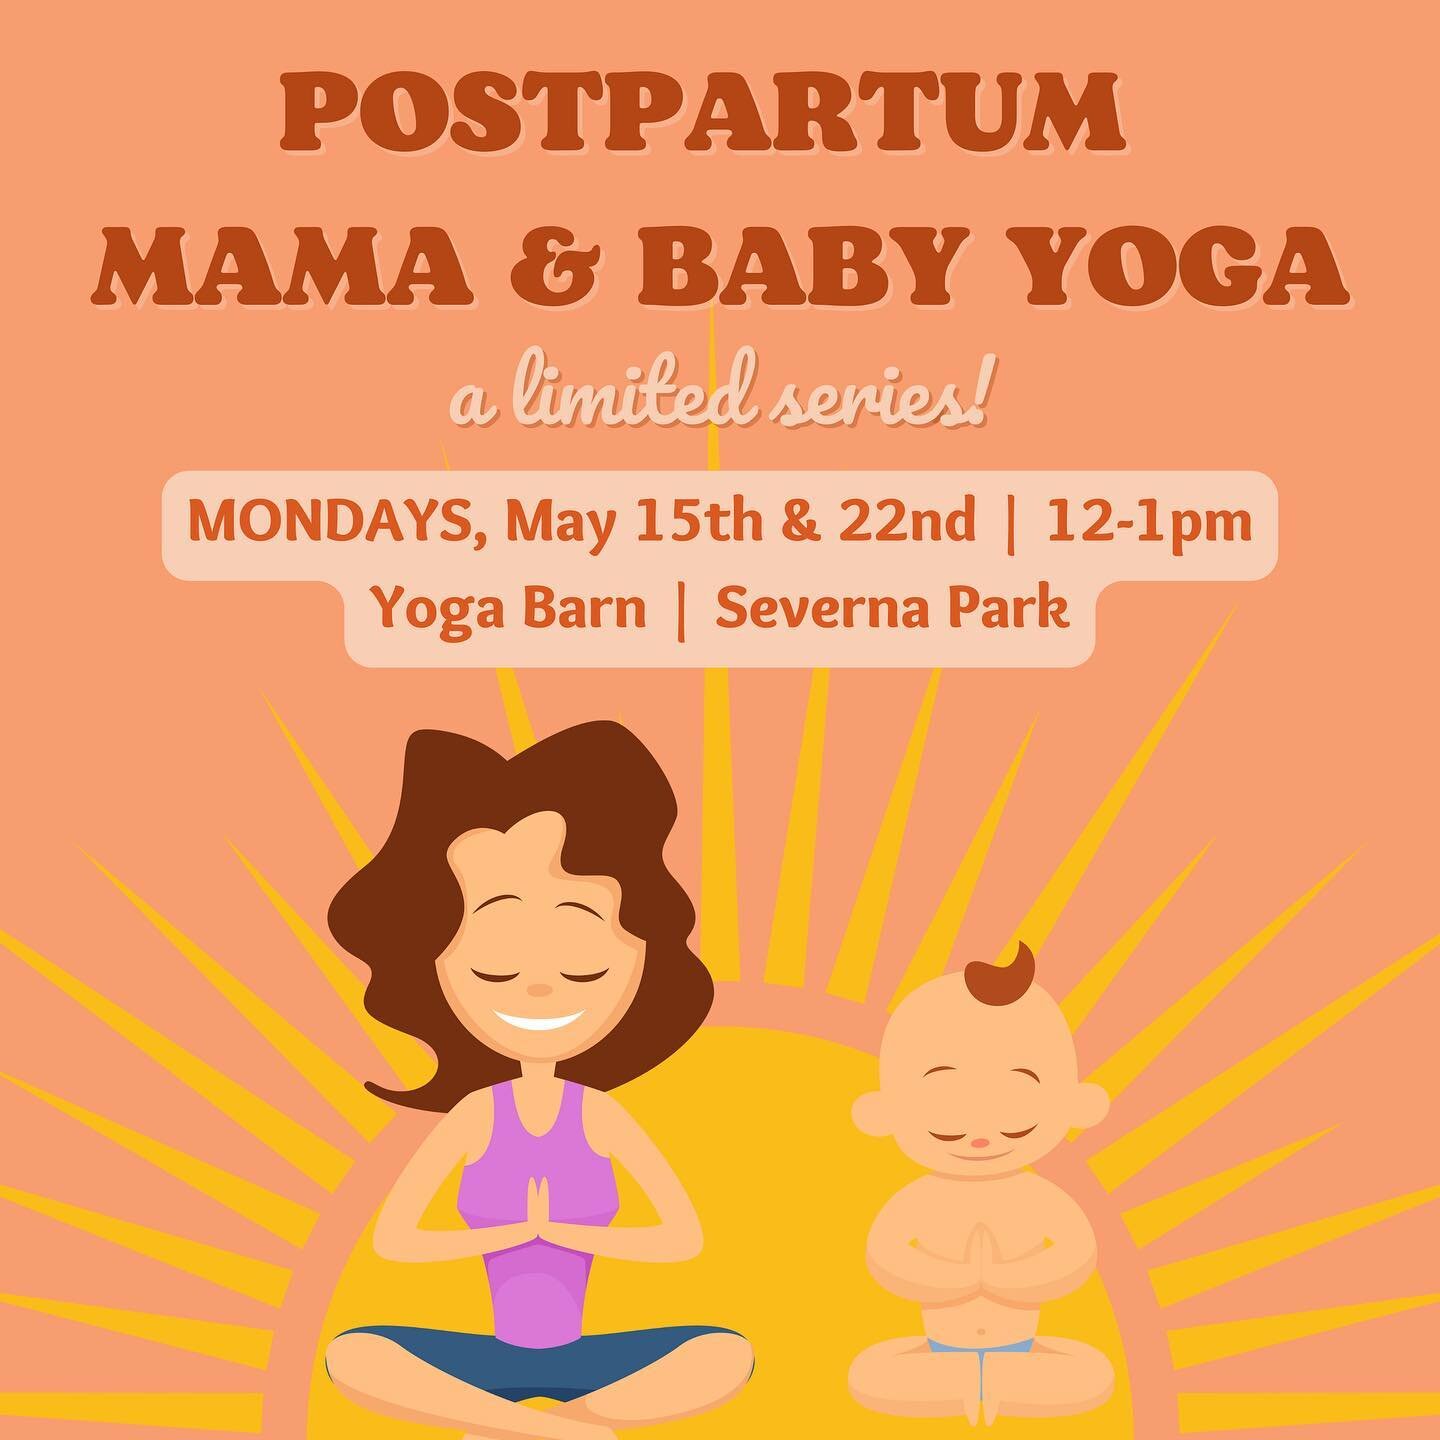 We&rsquo;re back for more Mama &amp; Baby Yoga!🧘🏻&zwj;♀️👶🏼

A 2-week limited series for postpartum Mamas to receive much needed yoga and self-care support 💫.

Class includes gentle and grounding movement to help connect back to your body 🧘🏻&zw